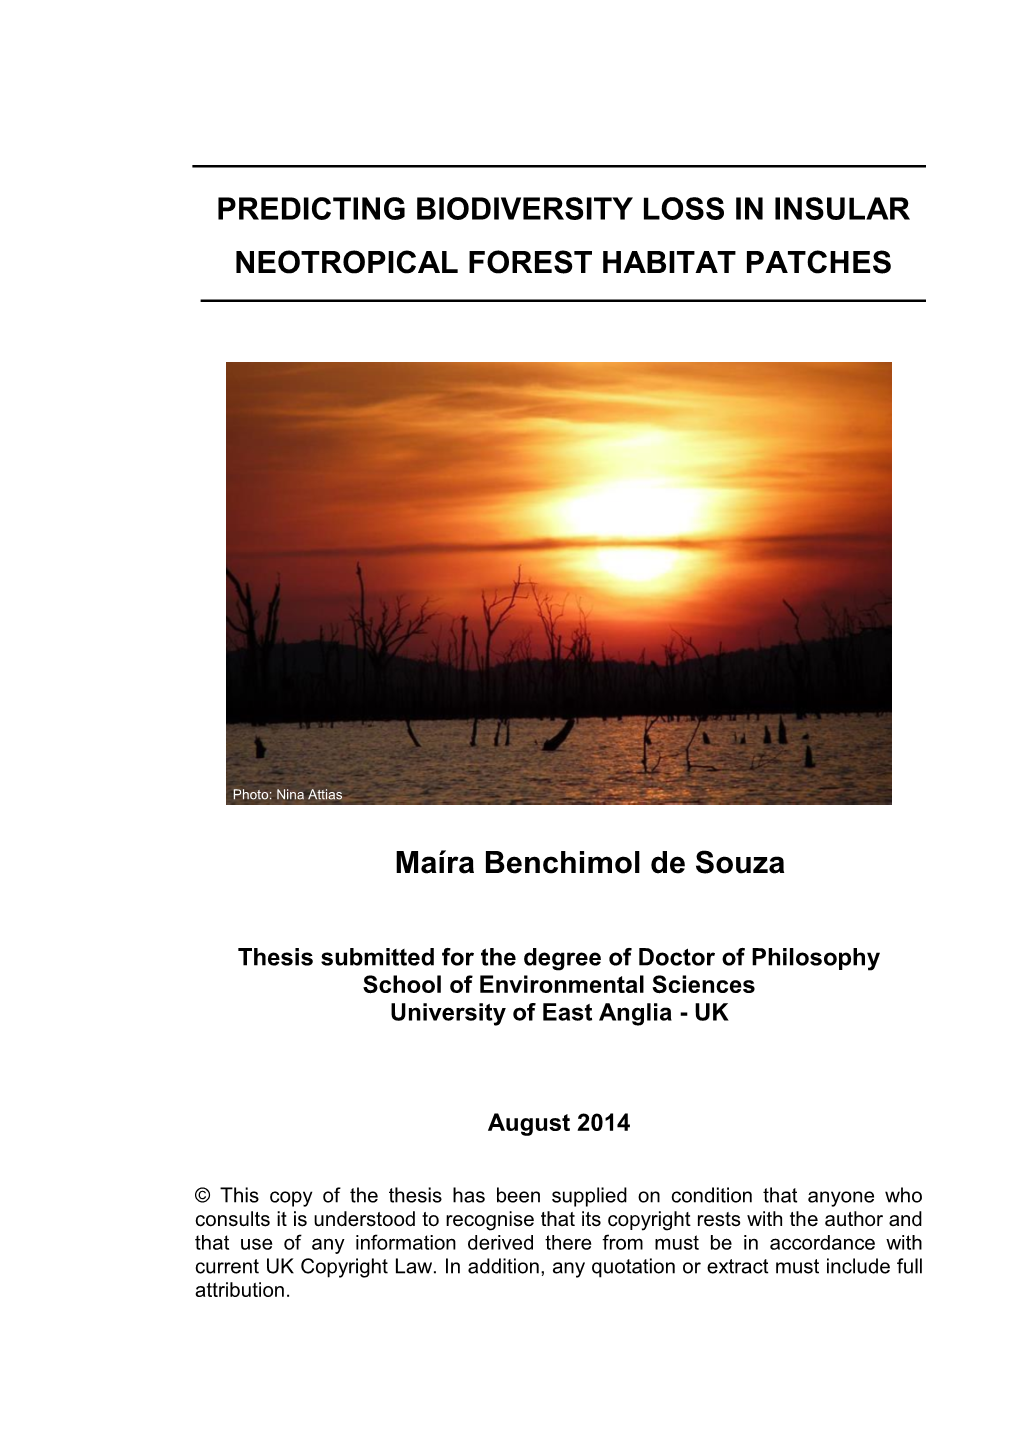 Predicting Biodiversity Loss in Insular Neotropical Forest Habitat Patches